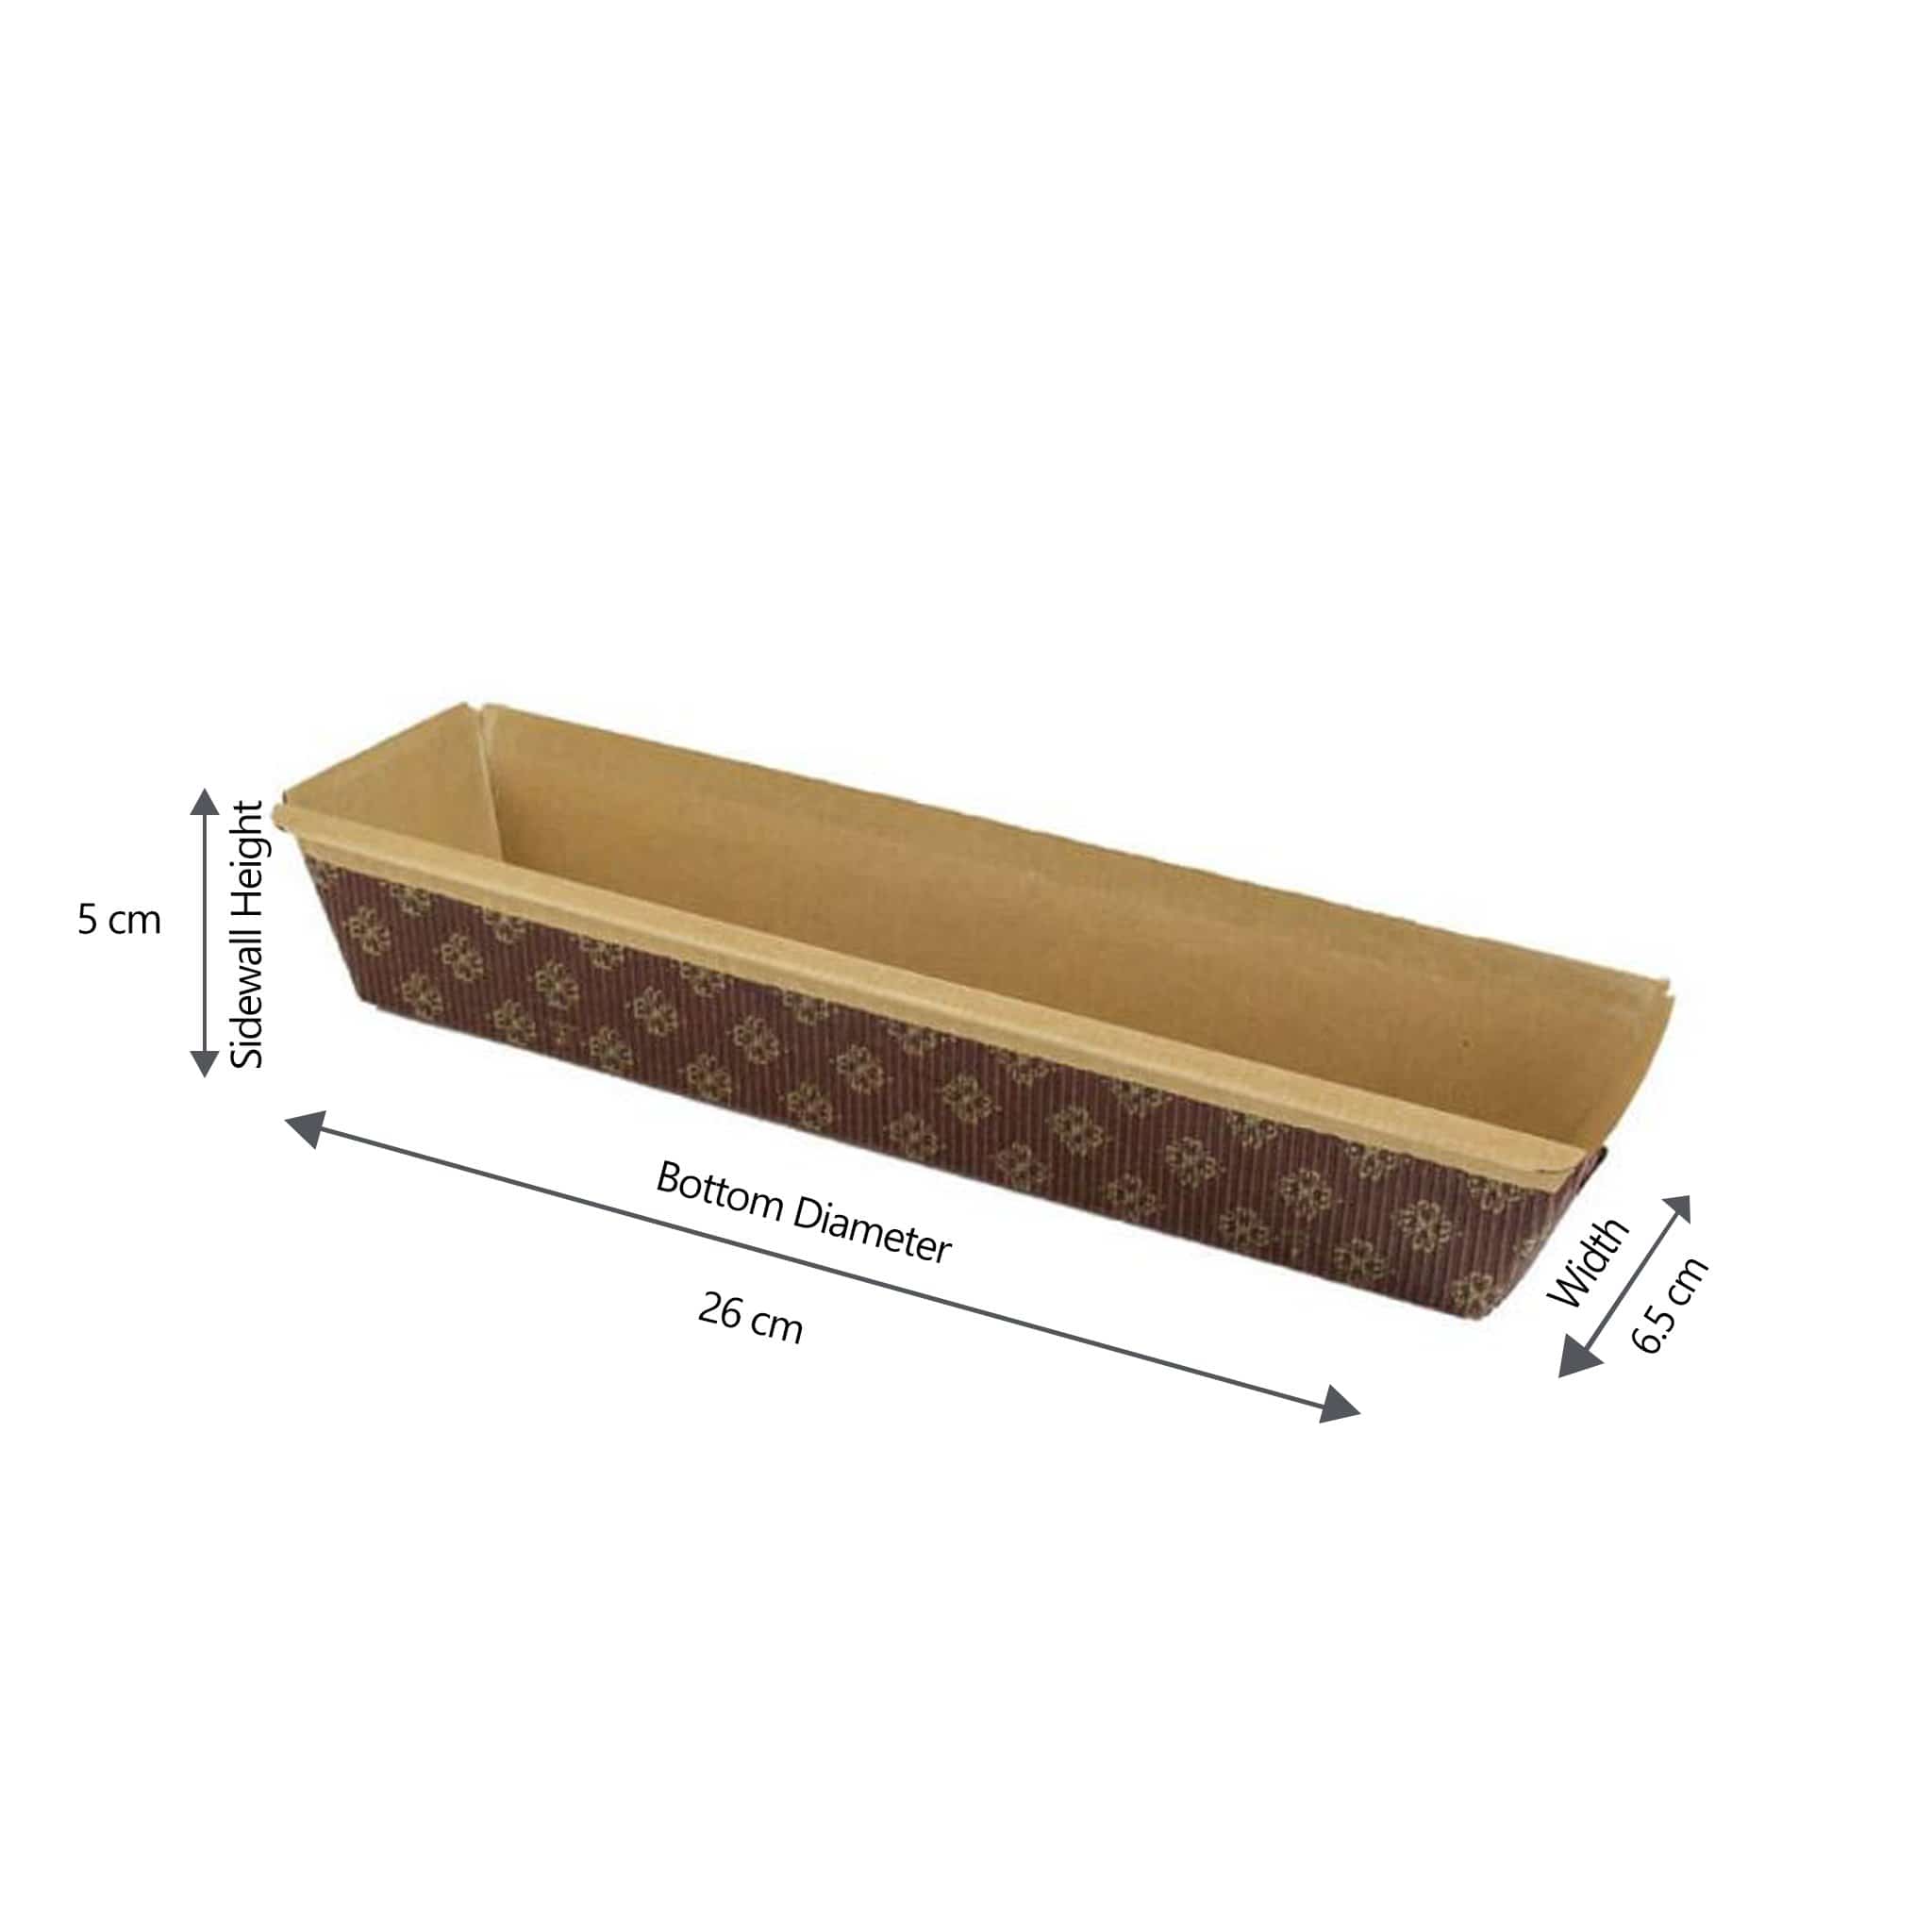 Hotpack |Baking Mold Rectangle 26x6.5x5 cm |1000 Pieces - Hotpack Global